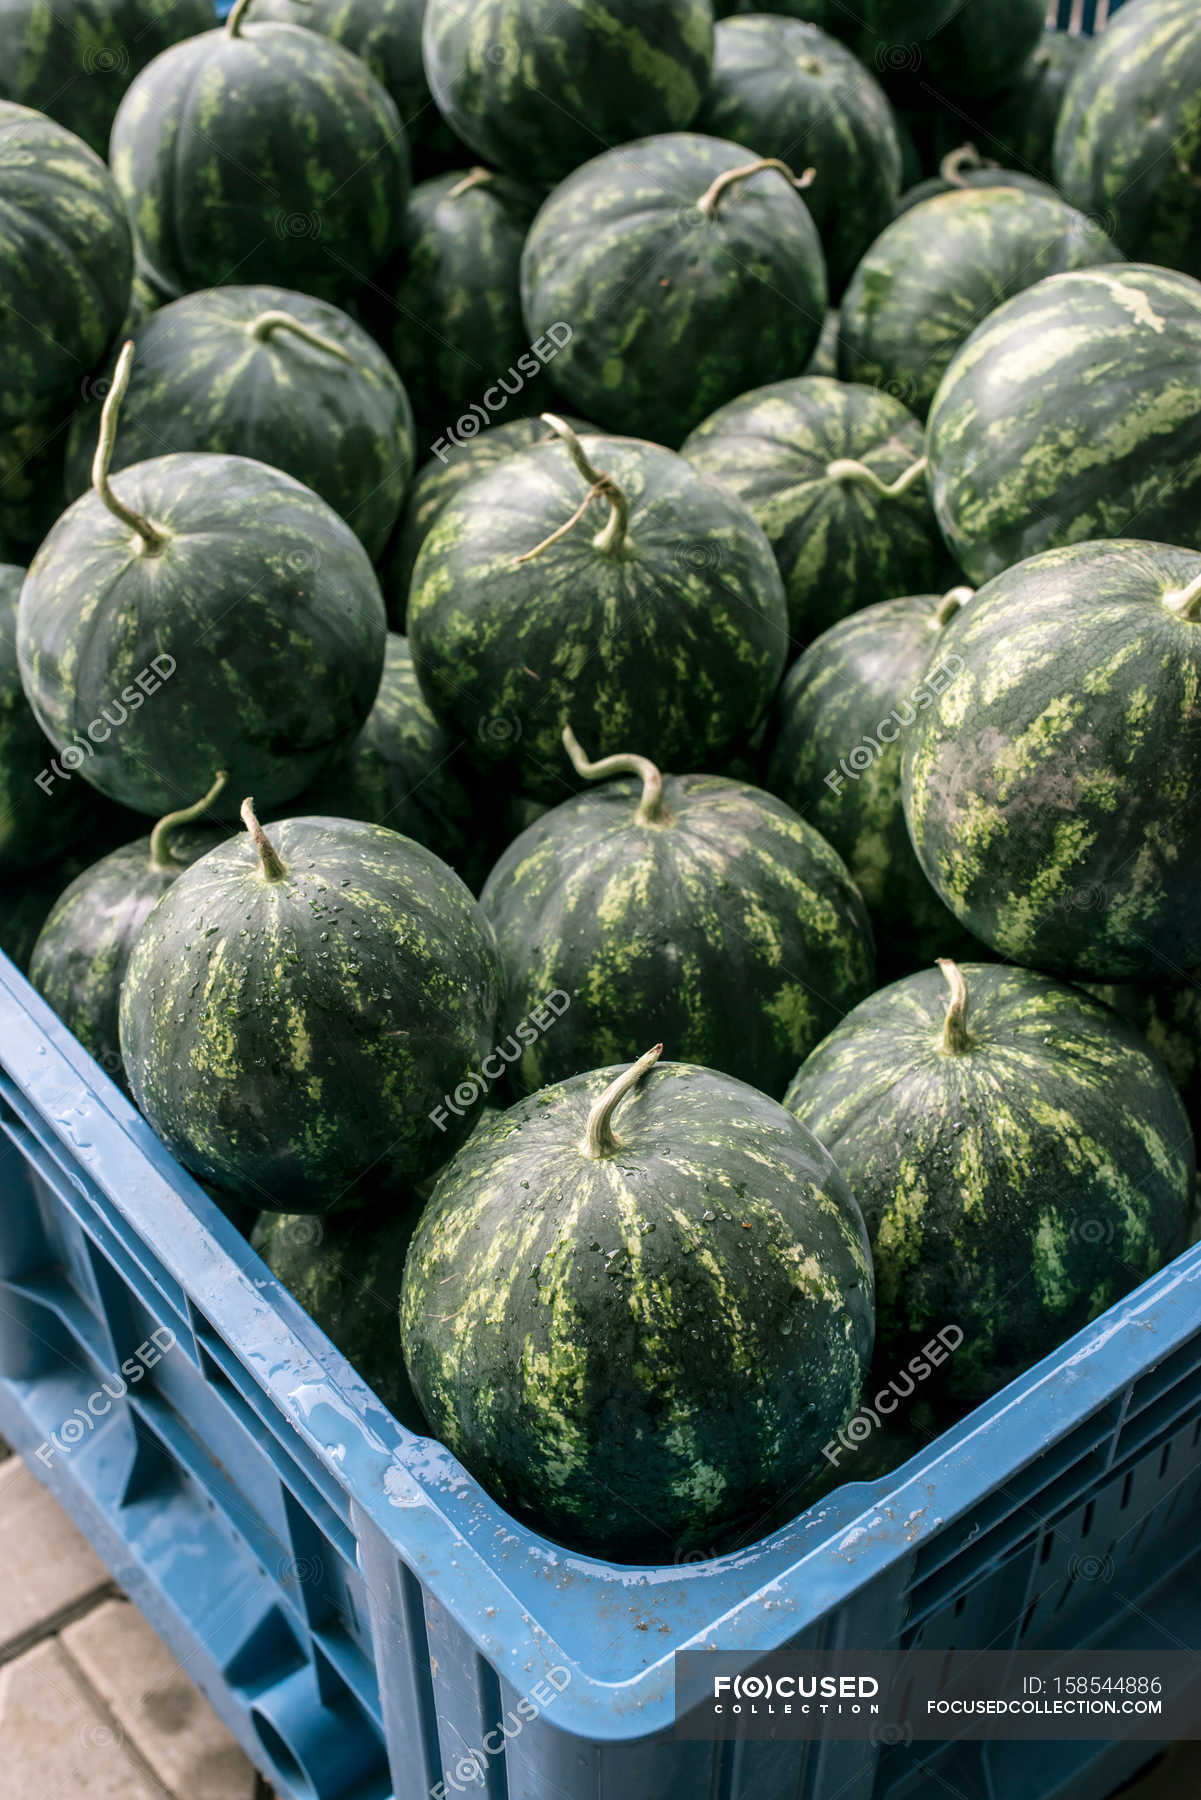 Watermelons in large crate — Stock Photo | #158544886